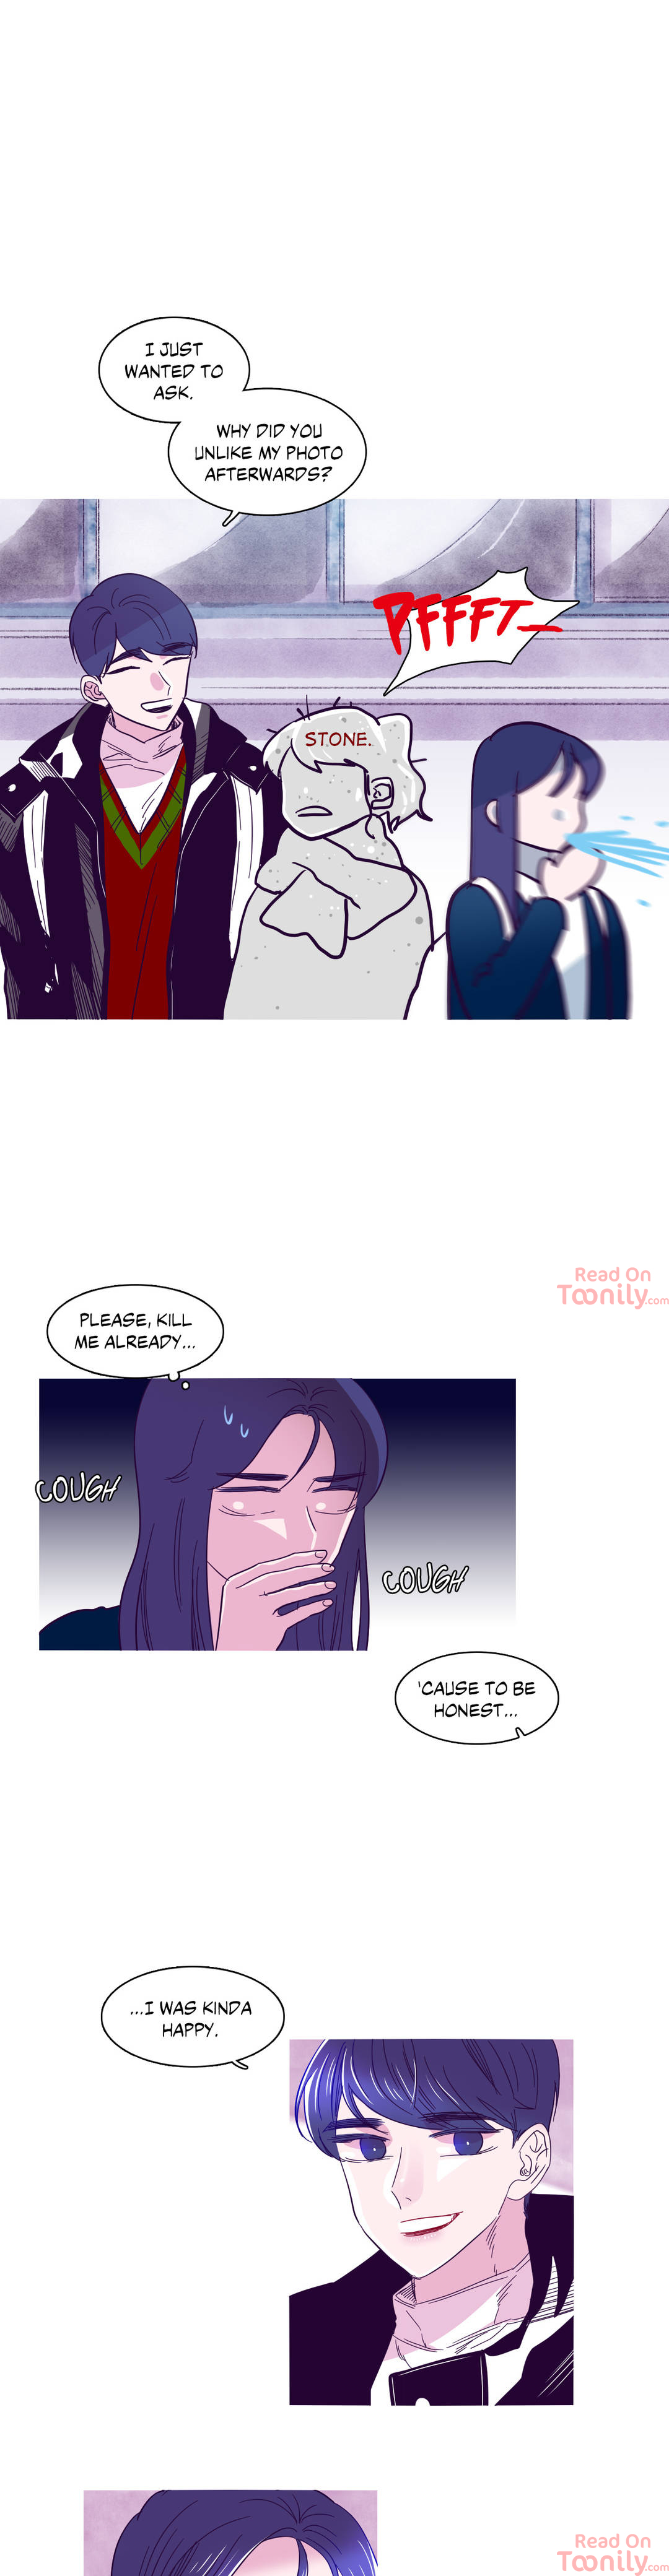 Shades and Shadows - Chapter 6 Page 19